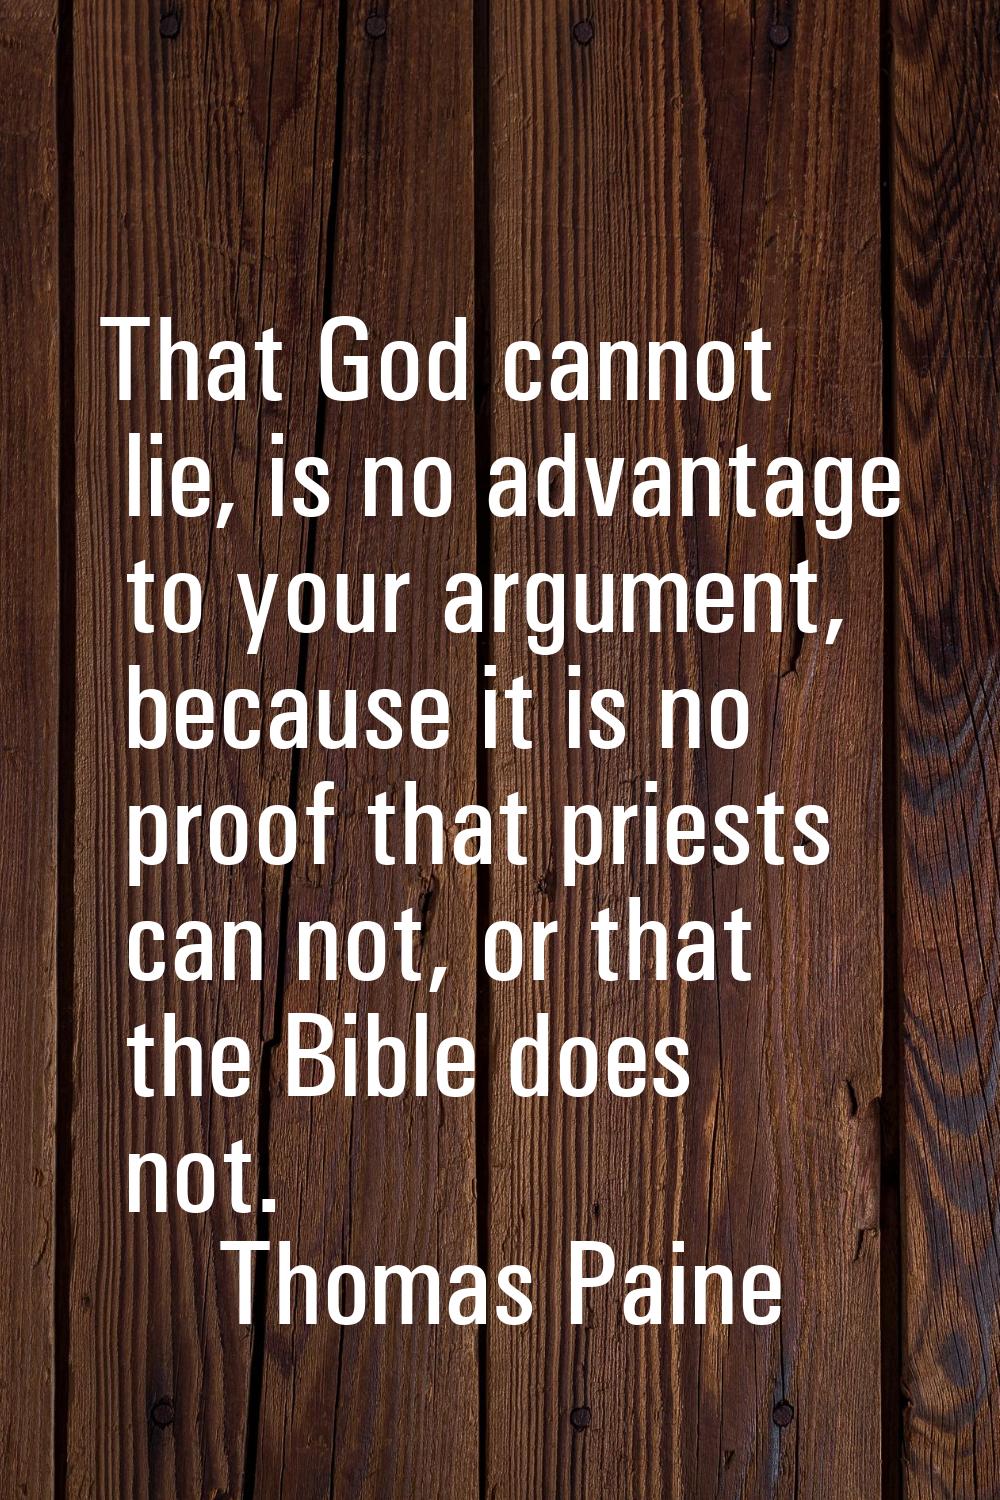 That God cannot lie, is no advantage to your argument, because it is no proof that priests can not,